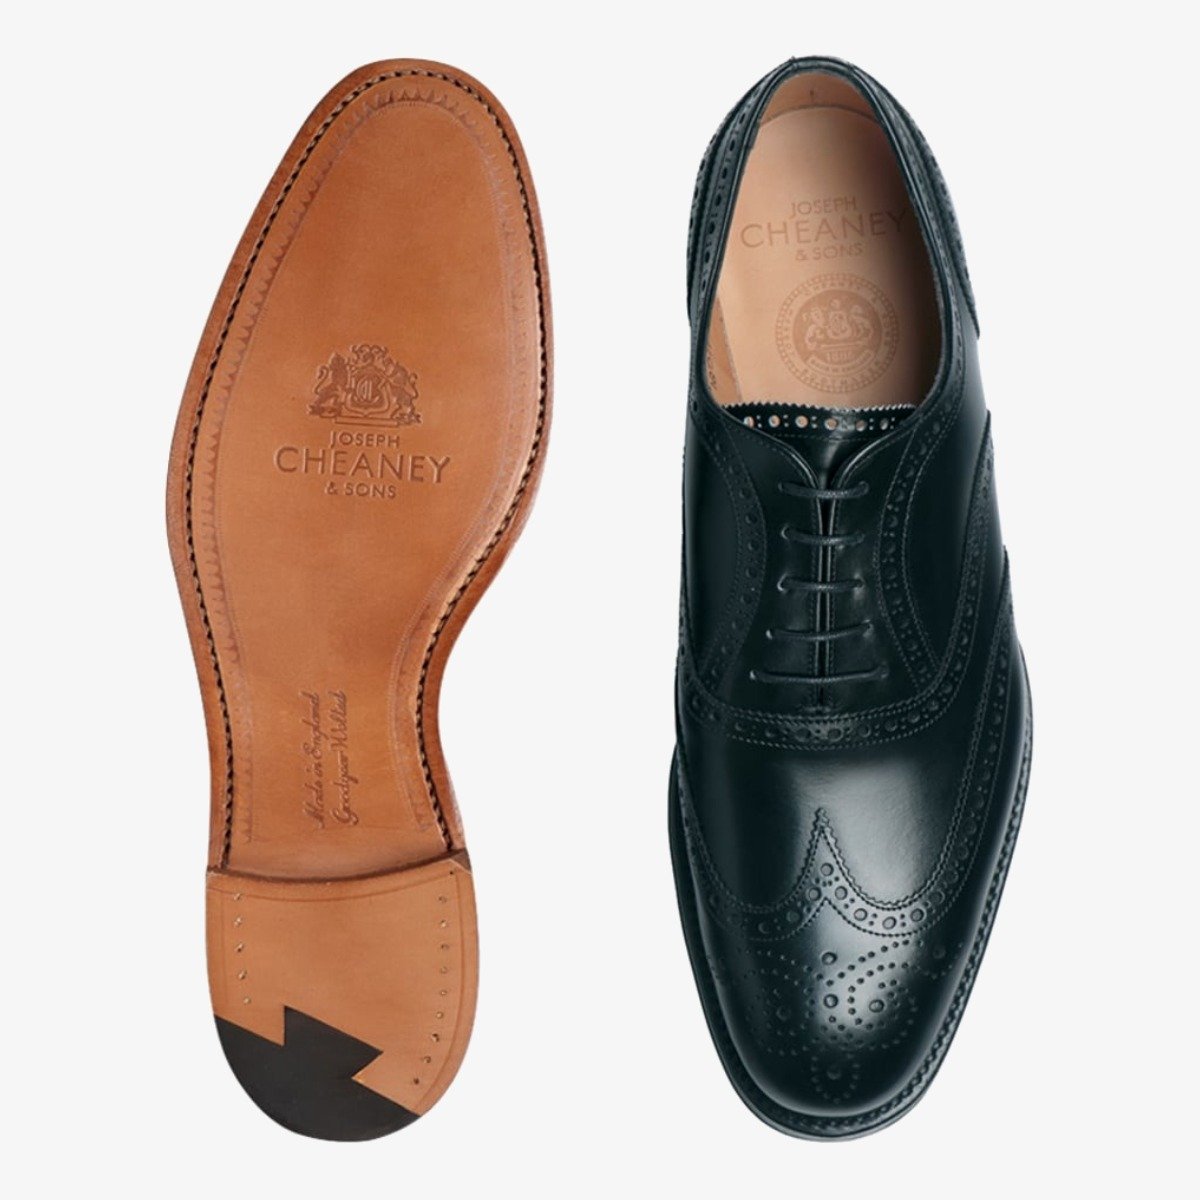 Cheaney Arthur III black brogue oxford shoes - G fit